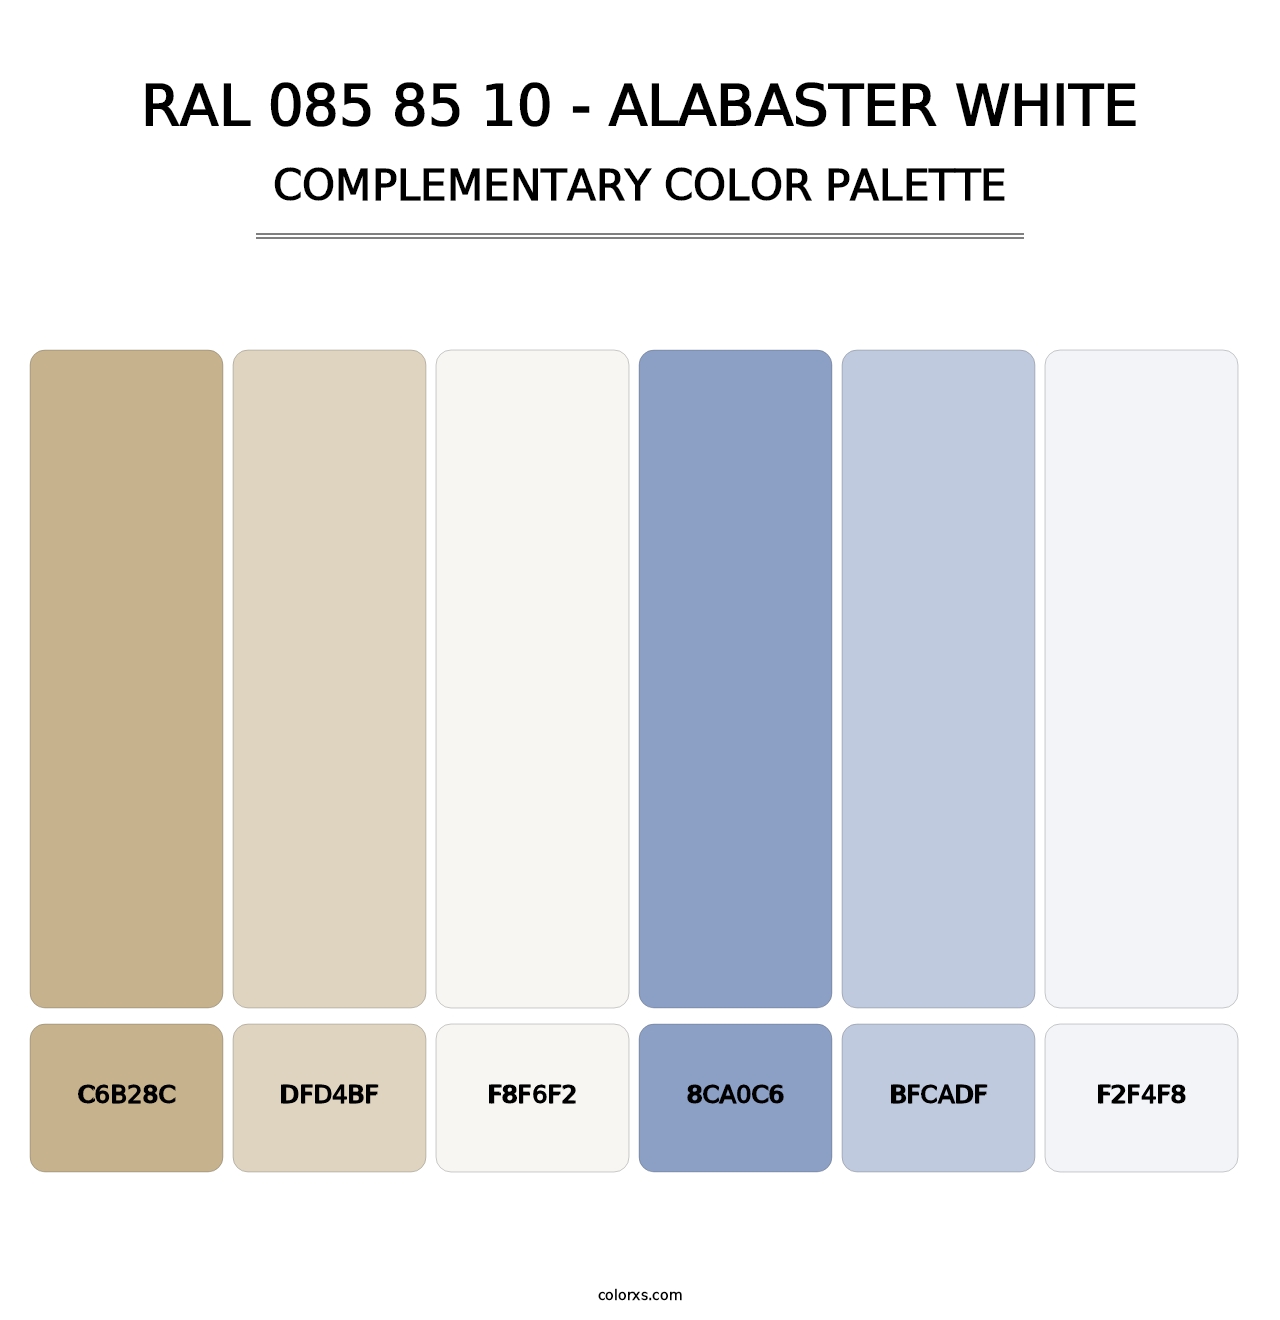 RAL 085 85 10 - Alabaster White - Complementary Color Palette